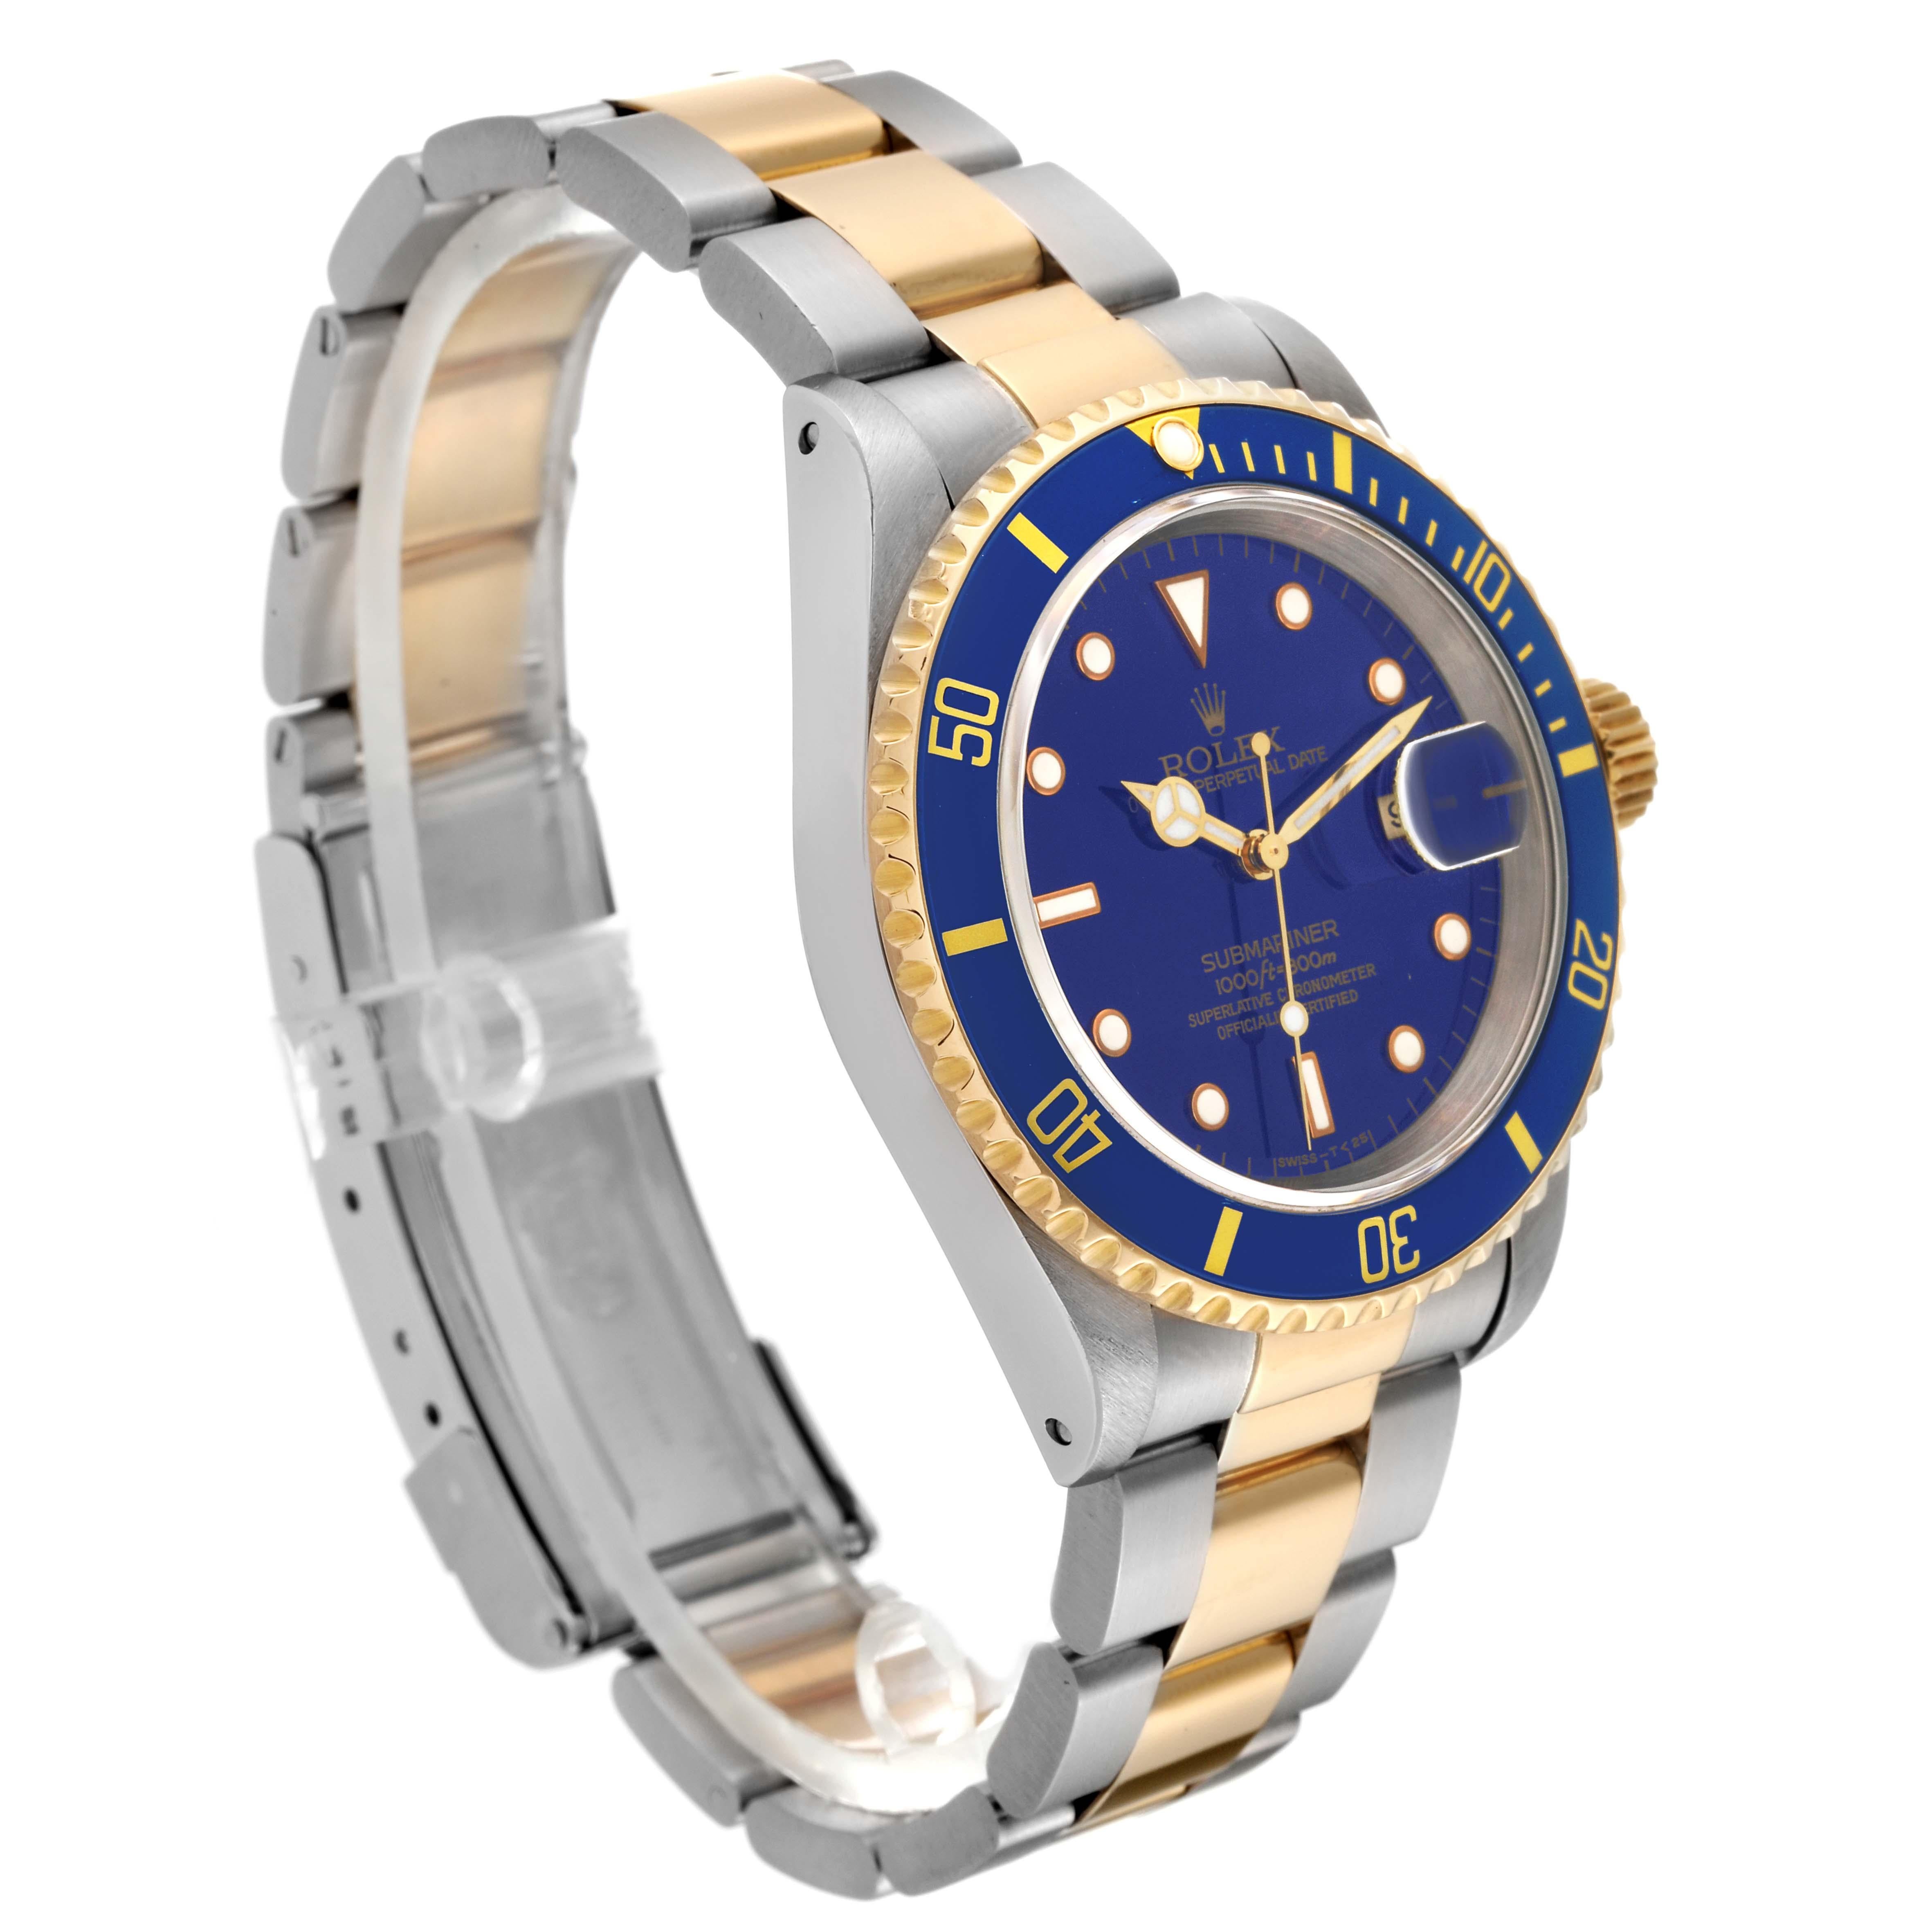 Rolex Submariner Blue Dial Steel Yellow Gold Mens Watch 16613 Box Papers 2